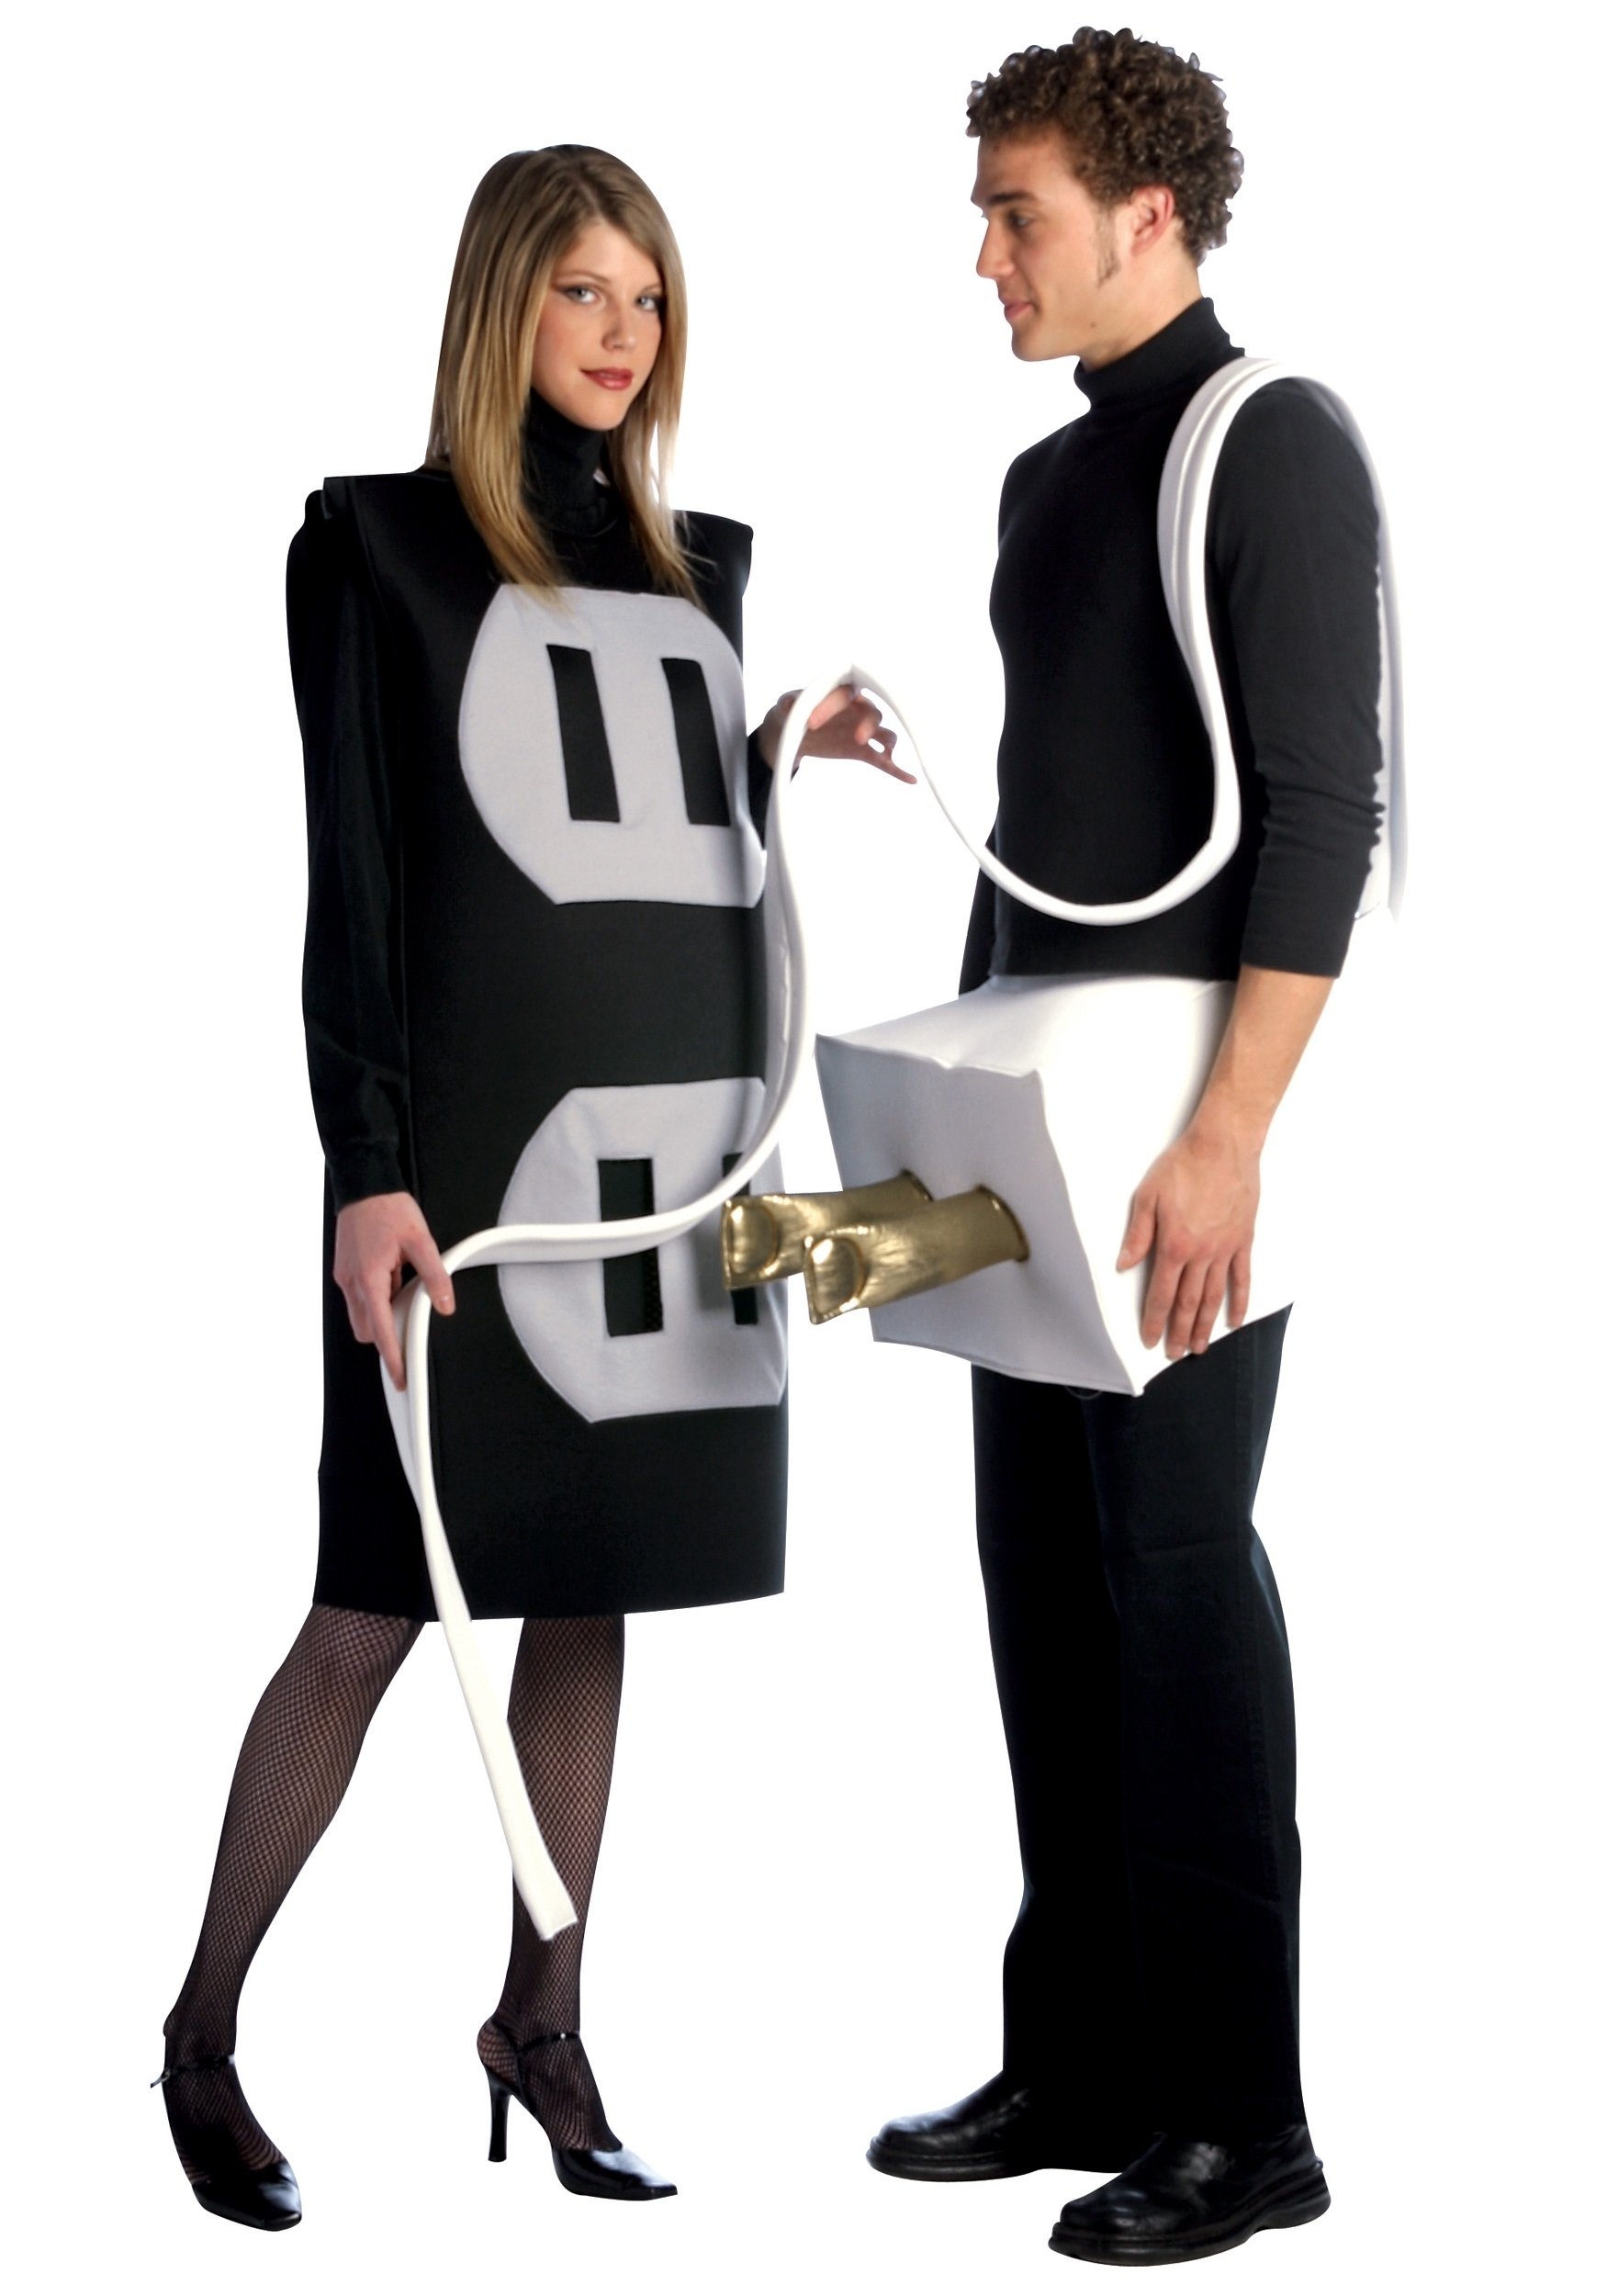 10 Awesome Funny Couple Halloween Costume Ideas plug and socket costume funny couples costume ideas 4 2022